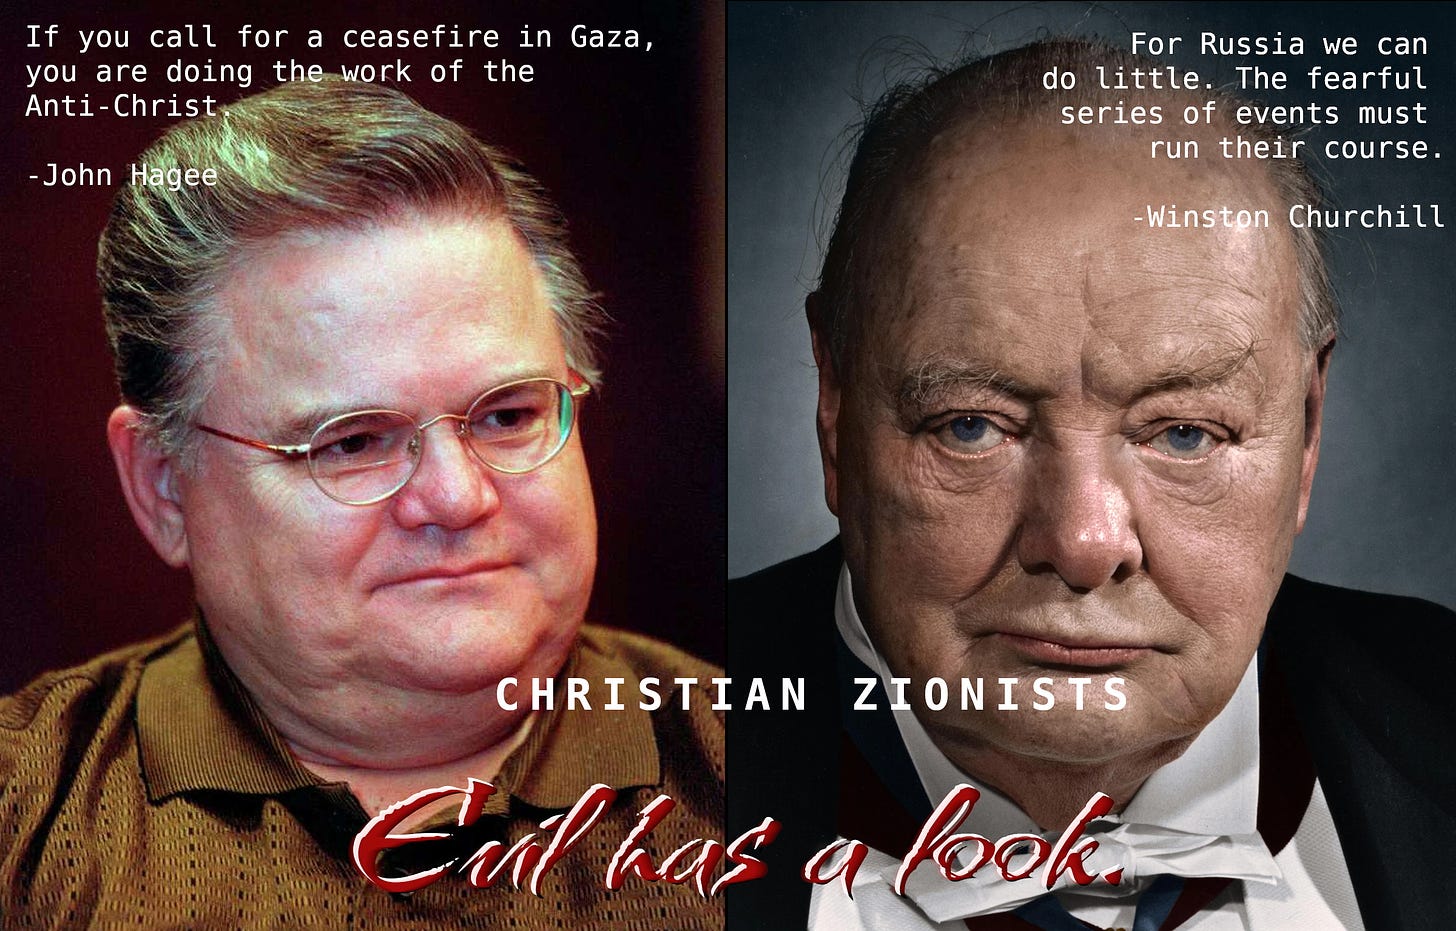 Composite image of John Hagee and Winston Churchill. Title: Christian Zionists. Hagee: If you call for a ceasefire in Gaza, you are doing the work of the Anti-Christ. Churchill: For Russia there is little we can do. The fearful series of events must run its course. Tag: Evil has a look. 